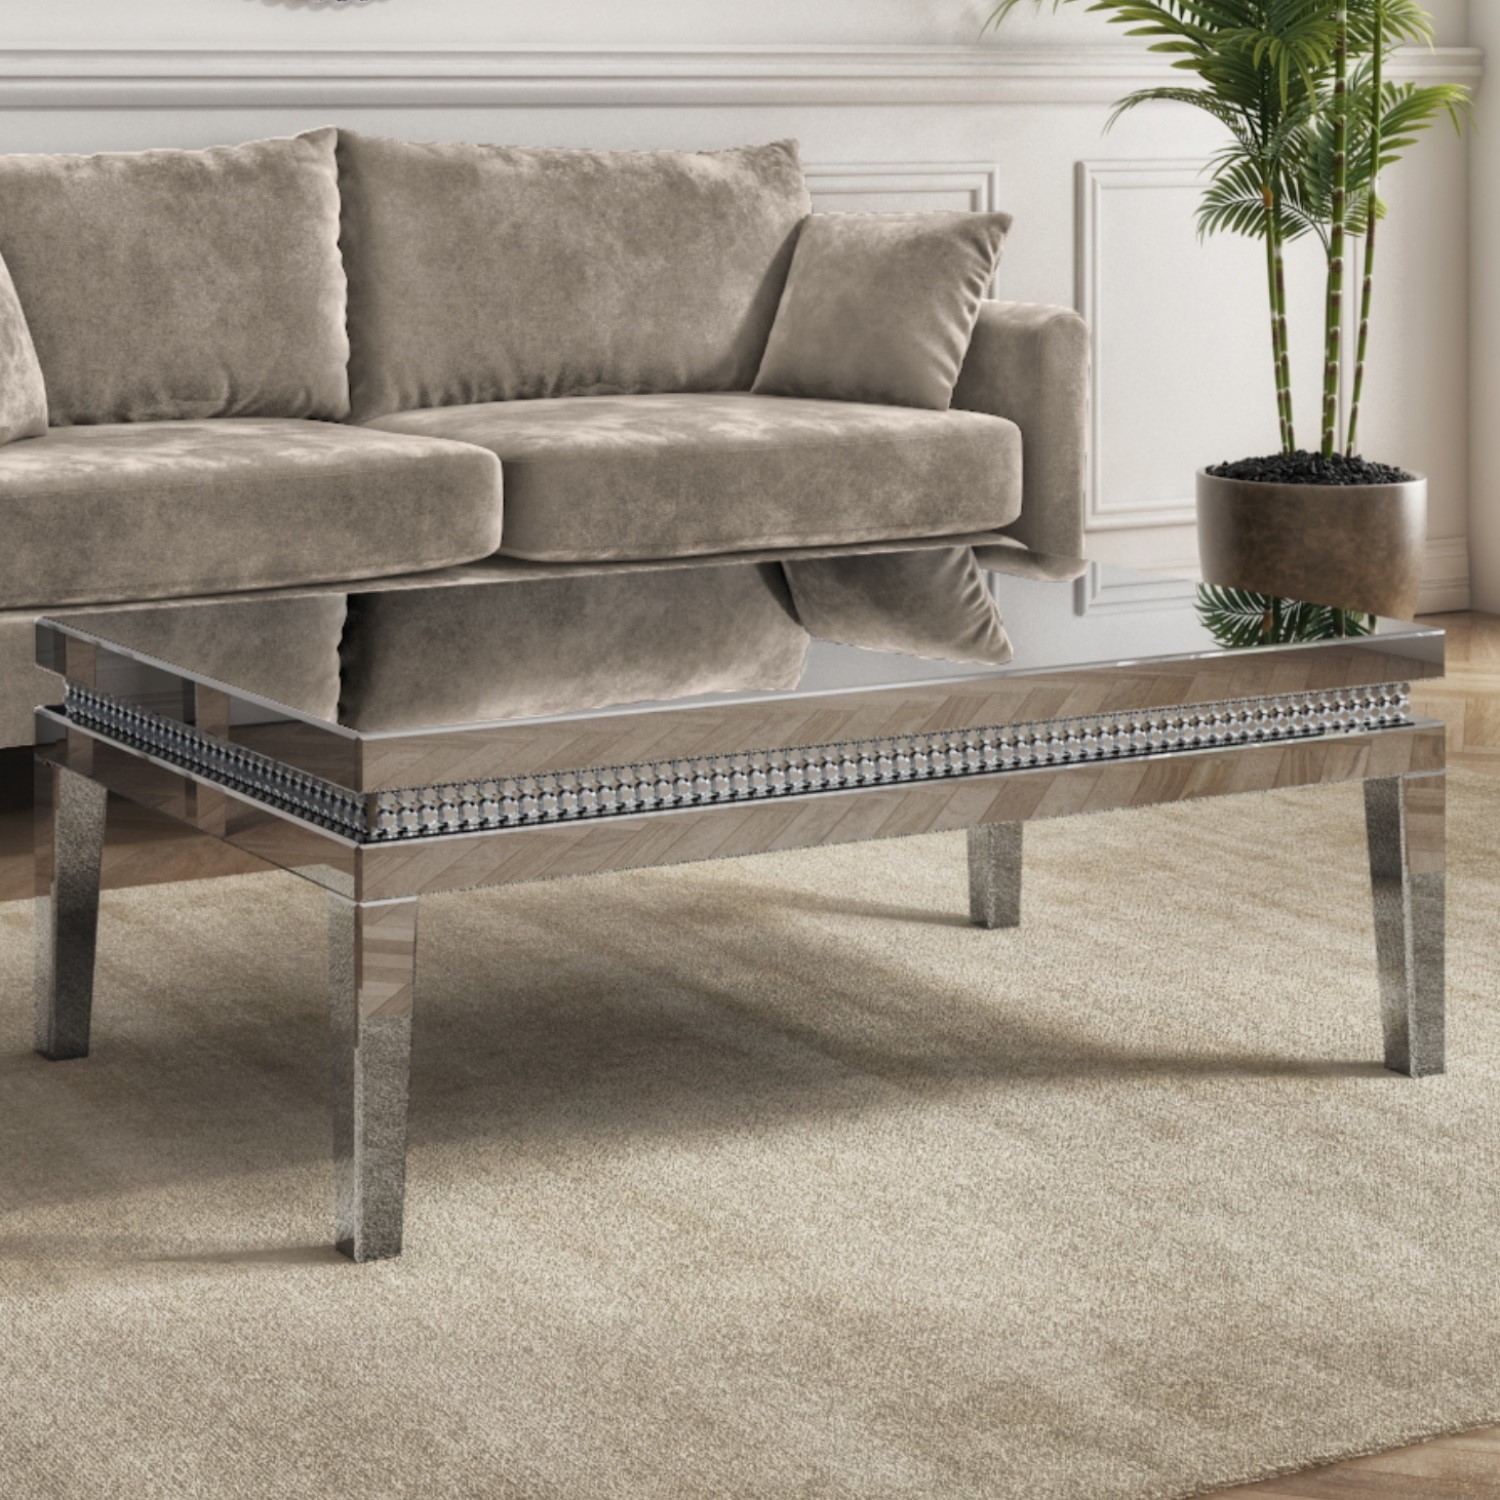 Photo of Large rectangular glass coffee table - jade boutique